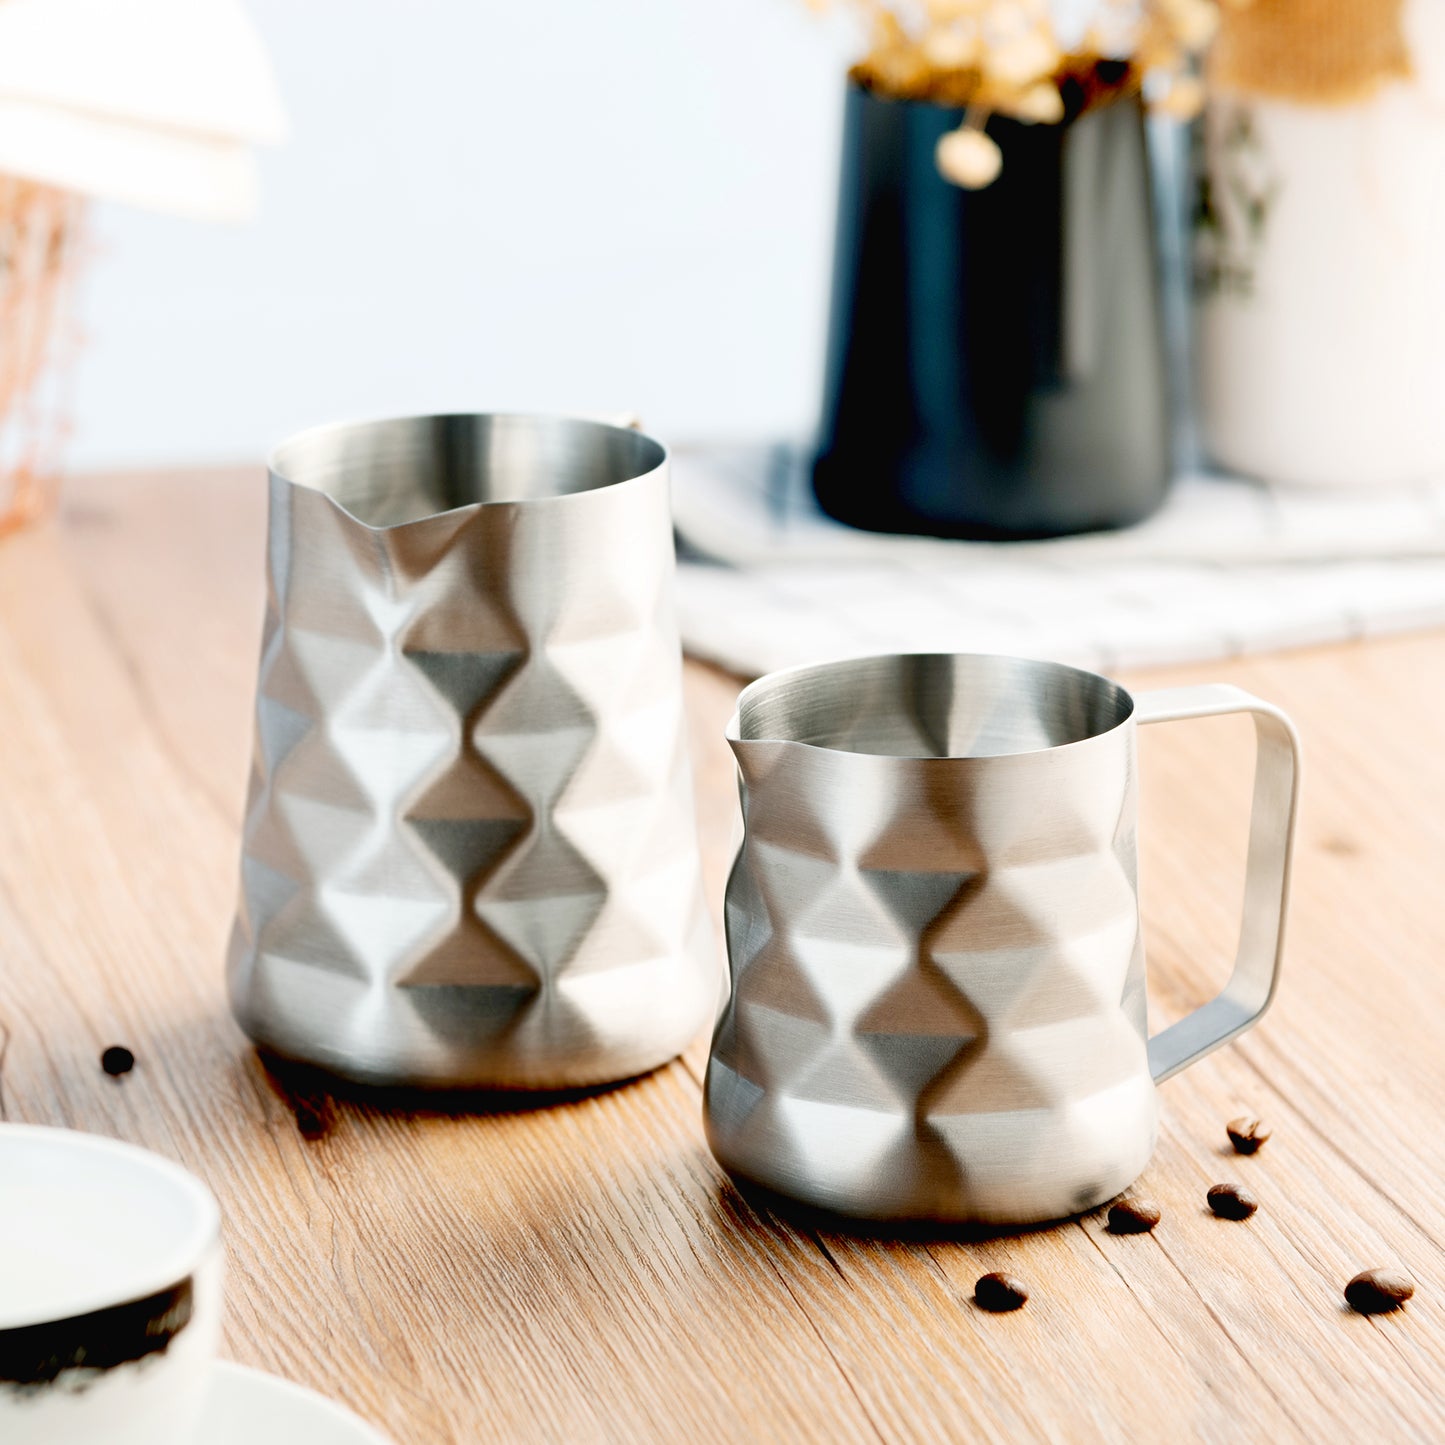 12oz And 20oz Stainless Steel Prismatic Frothing Pitchers On Table With Coffee Beans